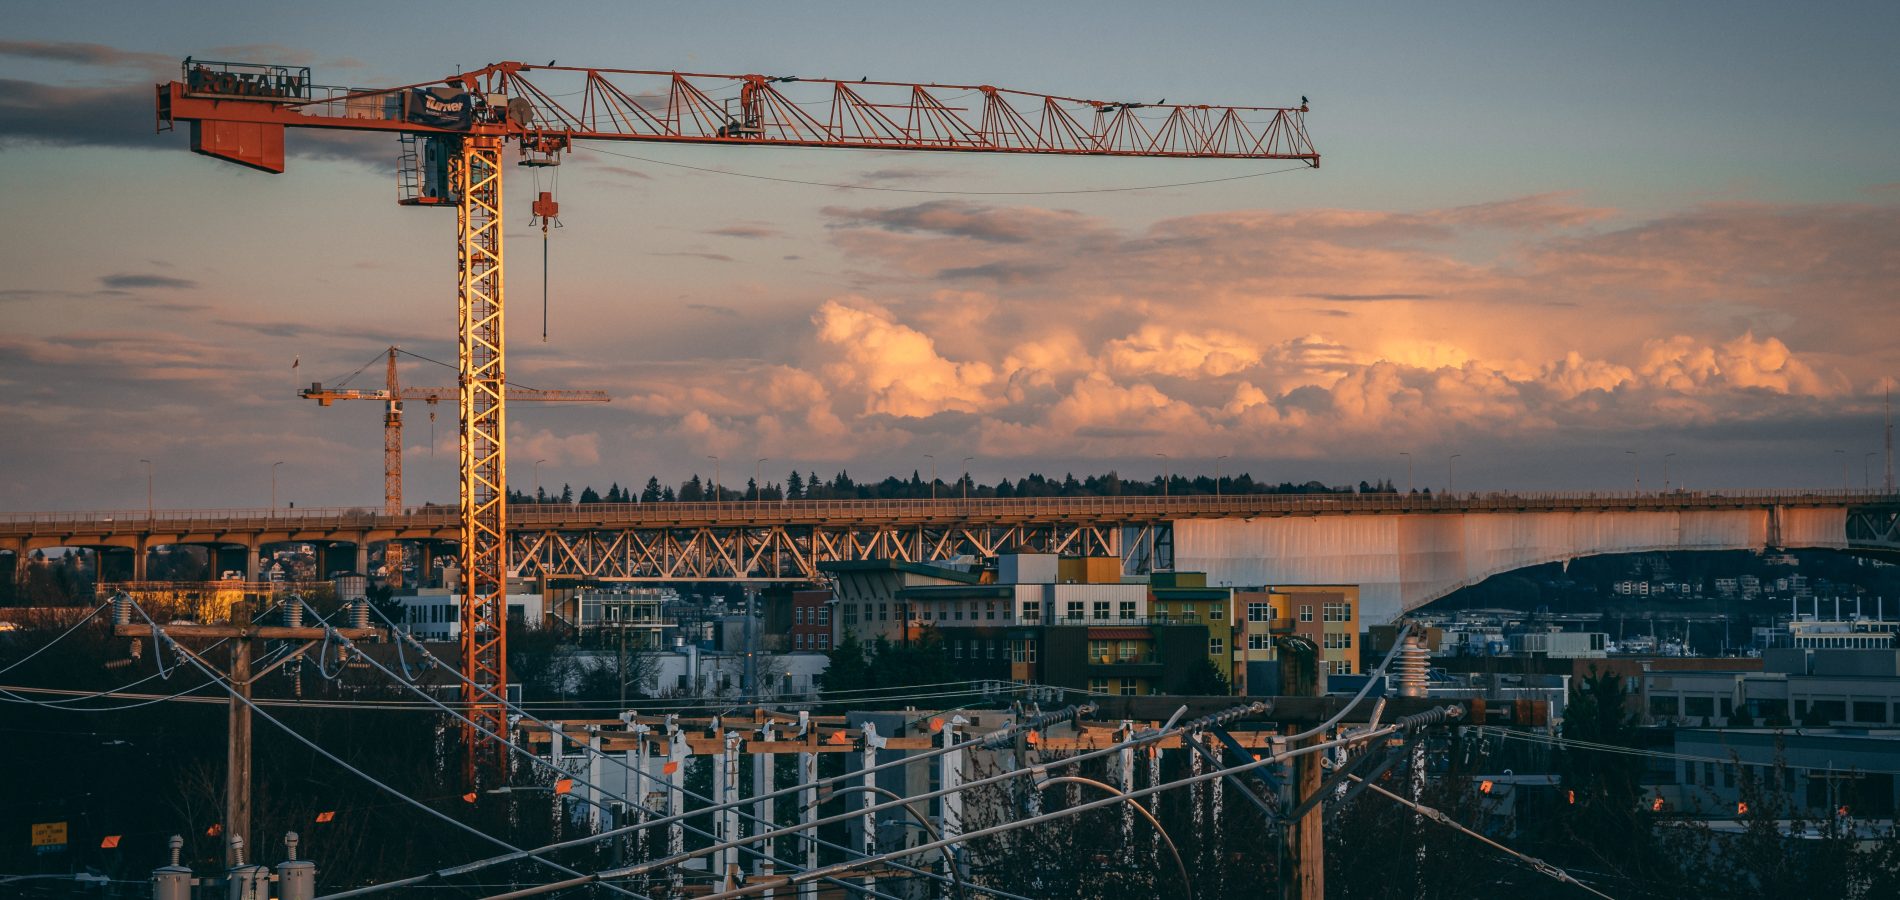 A beautiful view of a construction site in a city during sunset